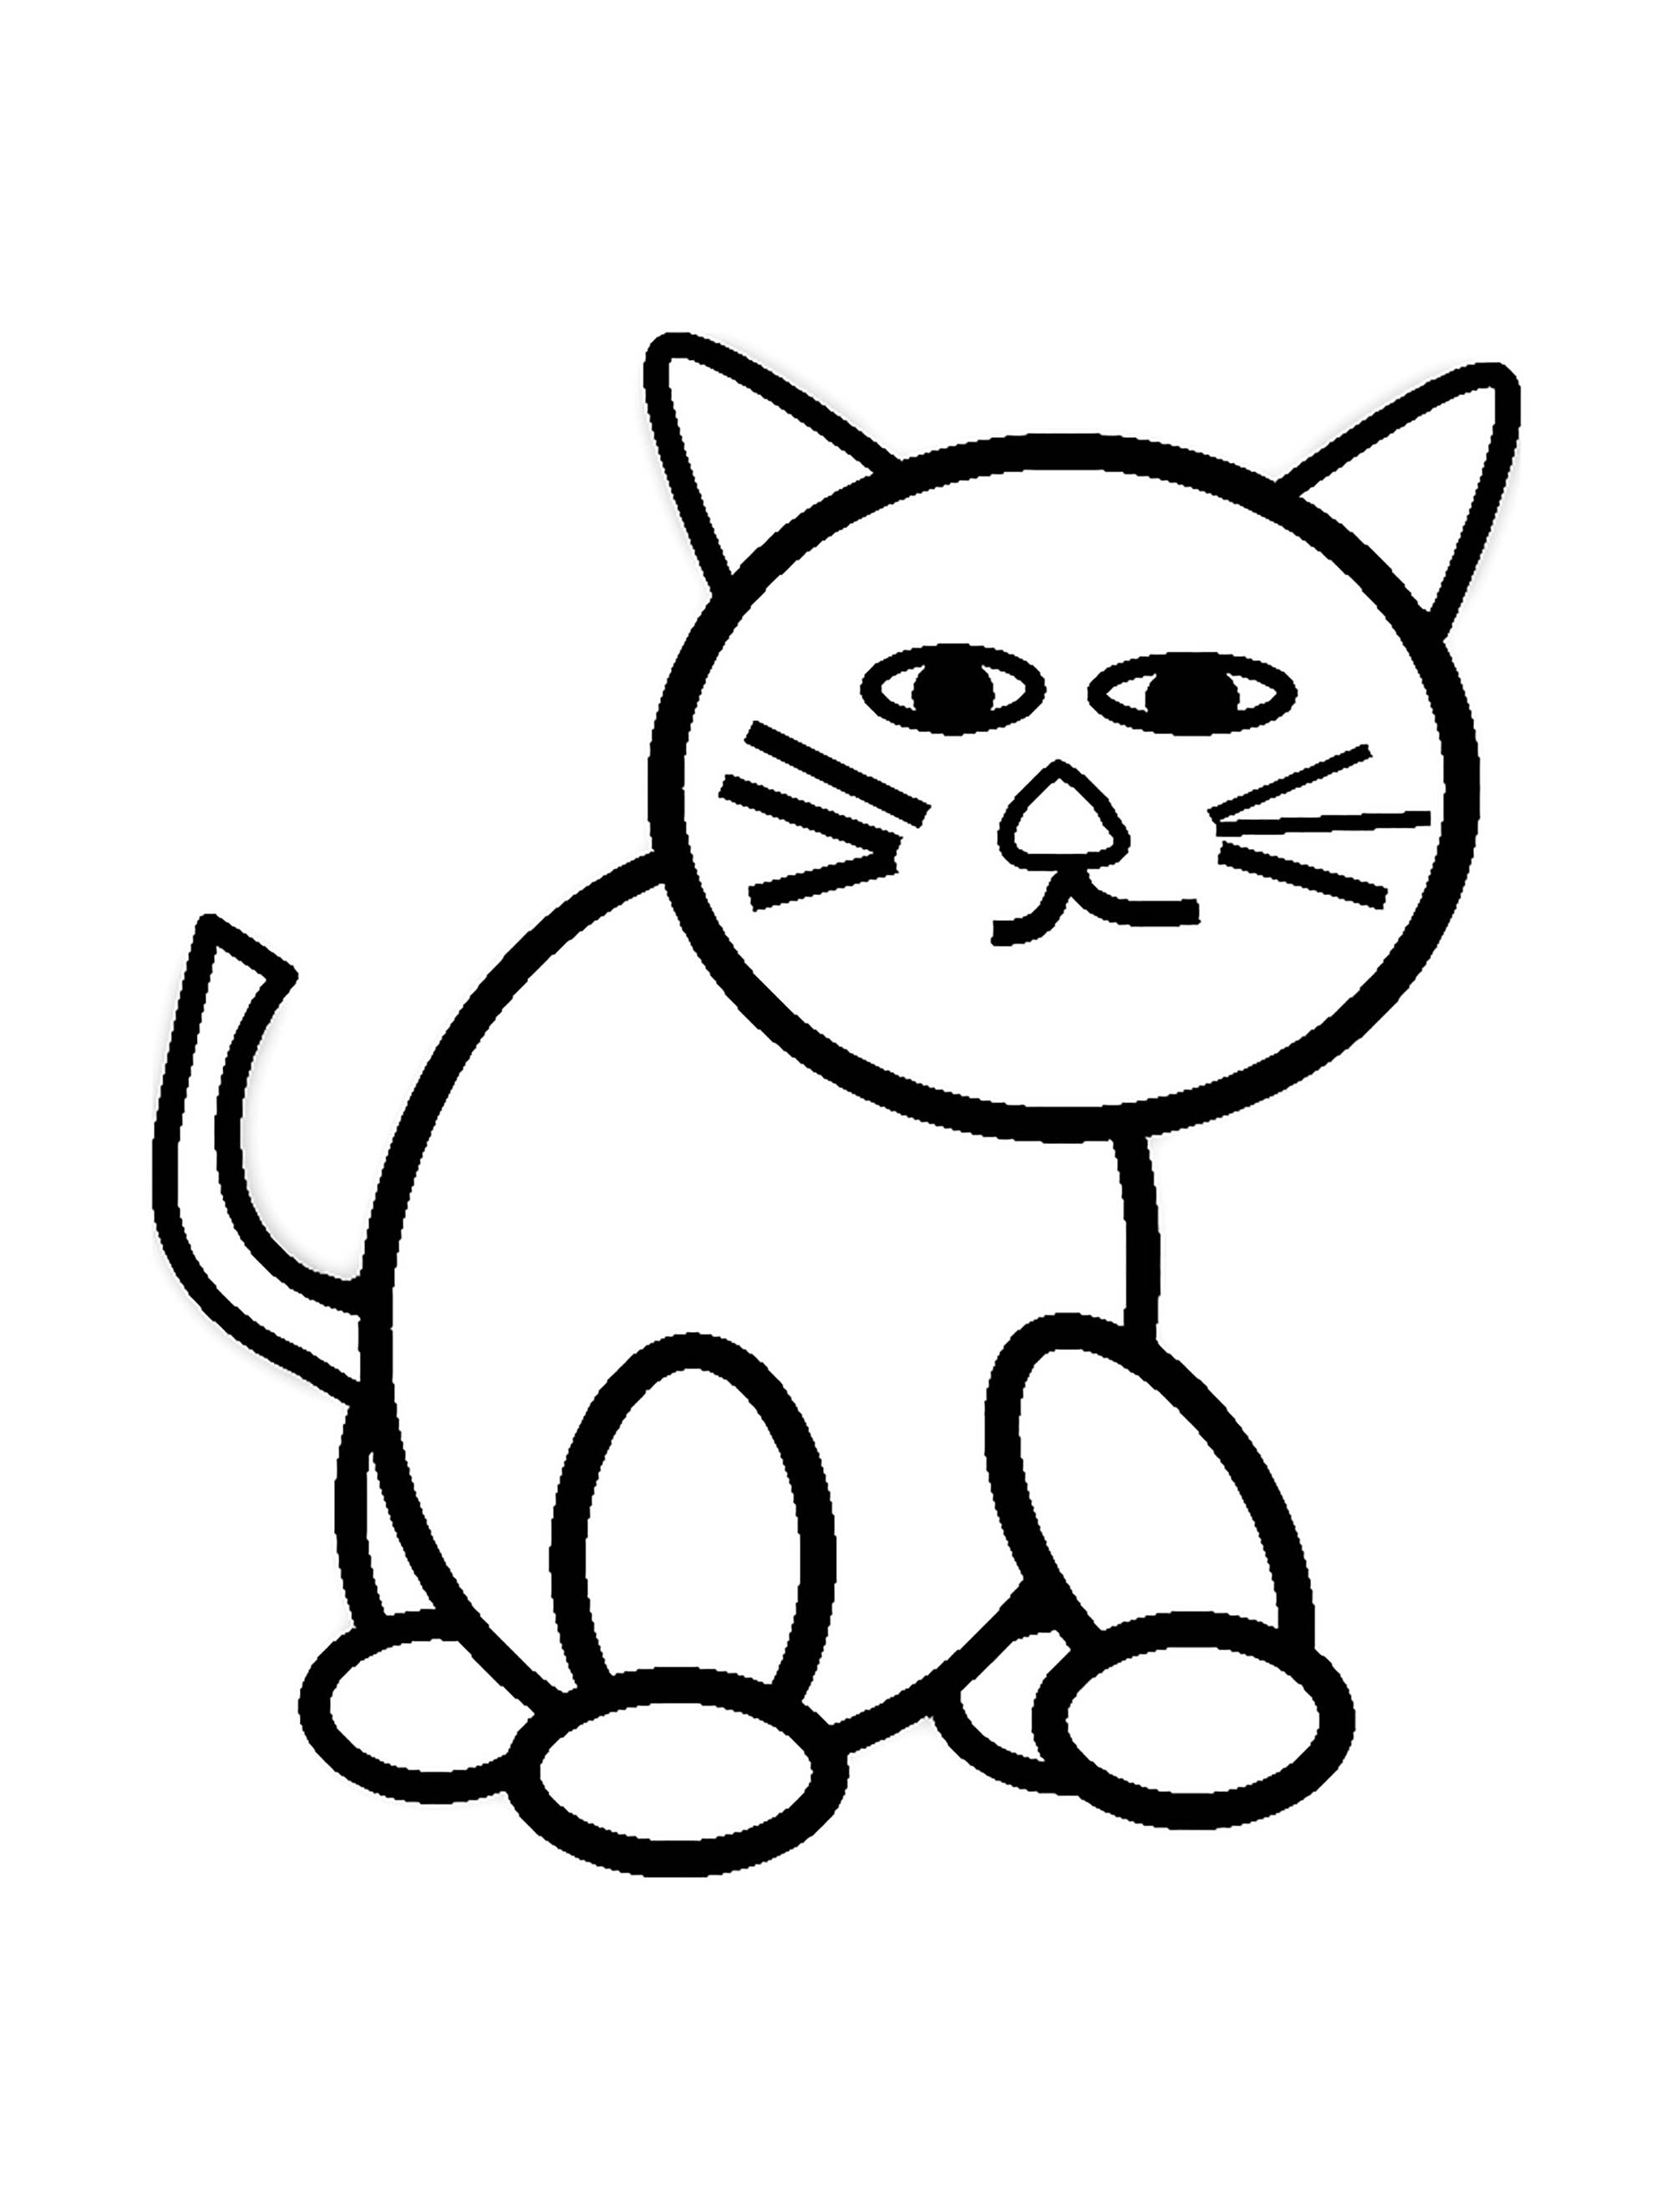 Cat Coloring Pages For Kids Cats Kids Coloring Pages